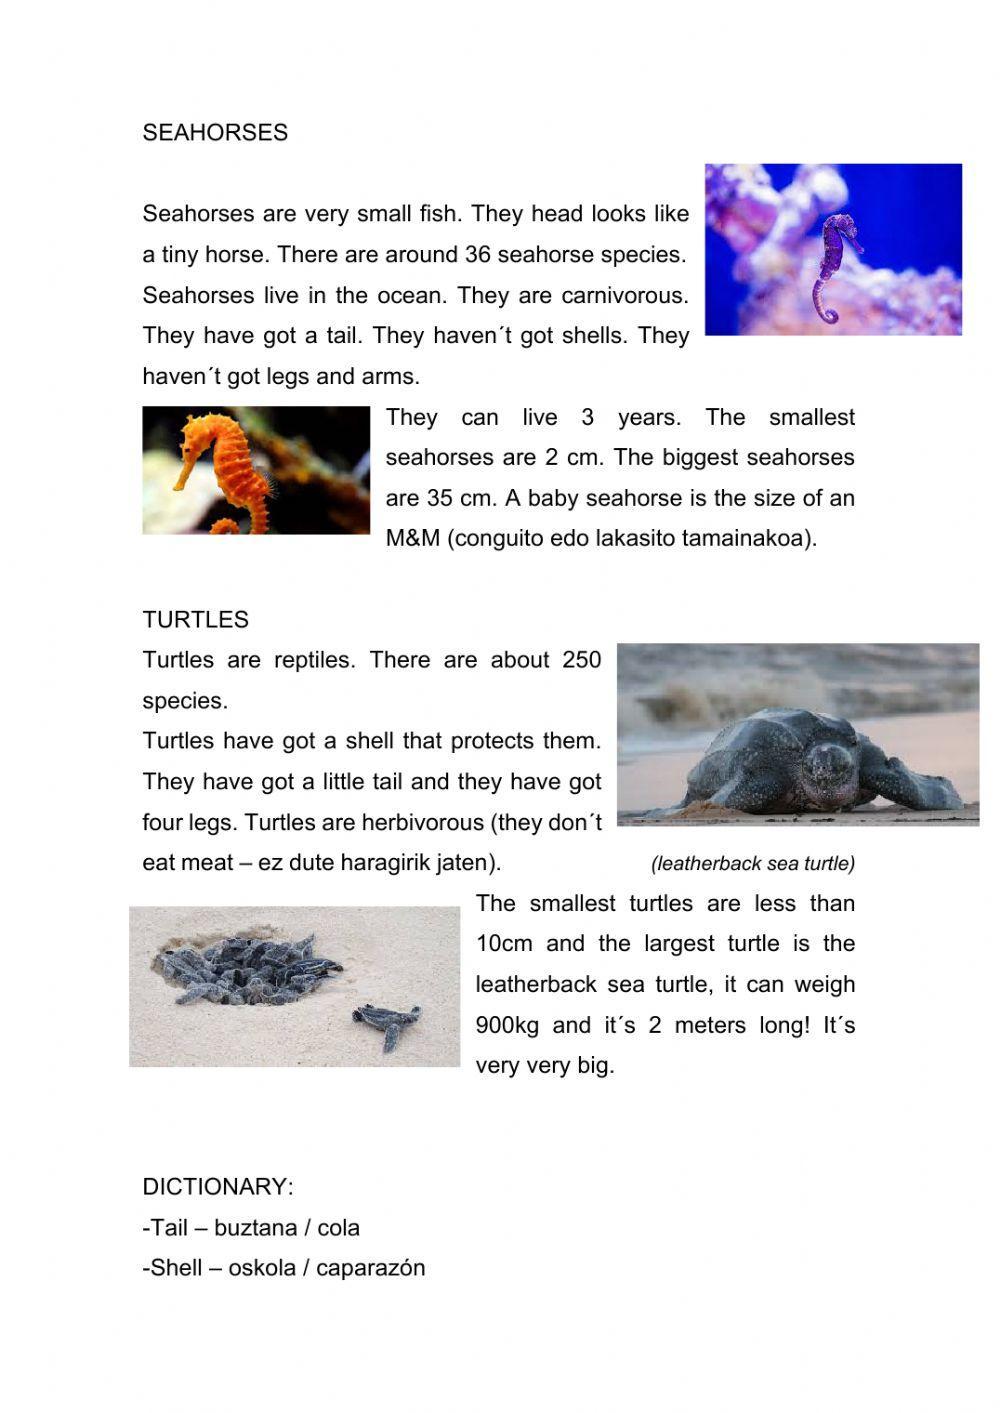 Seahorses and turtles